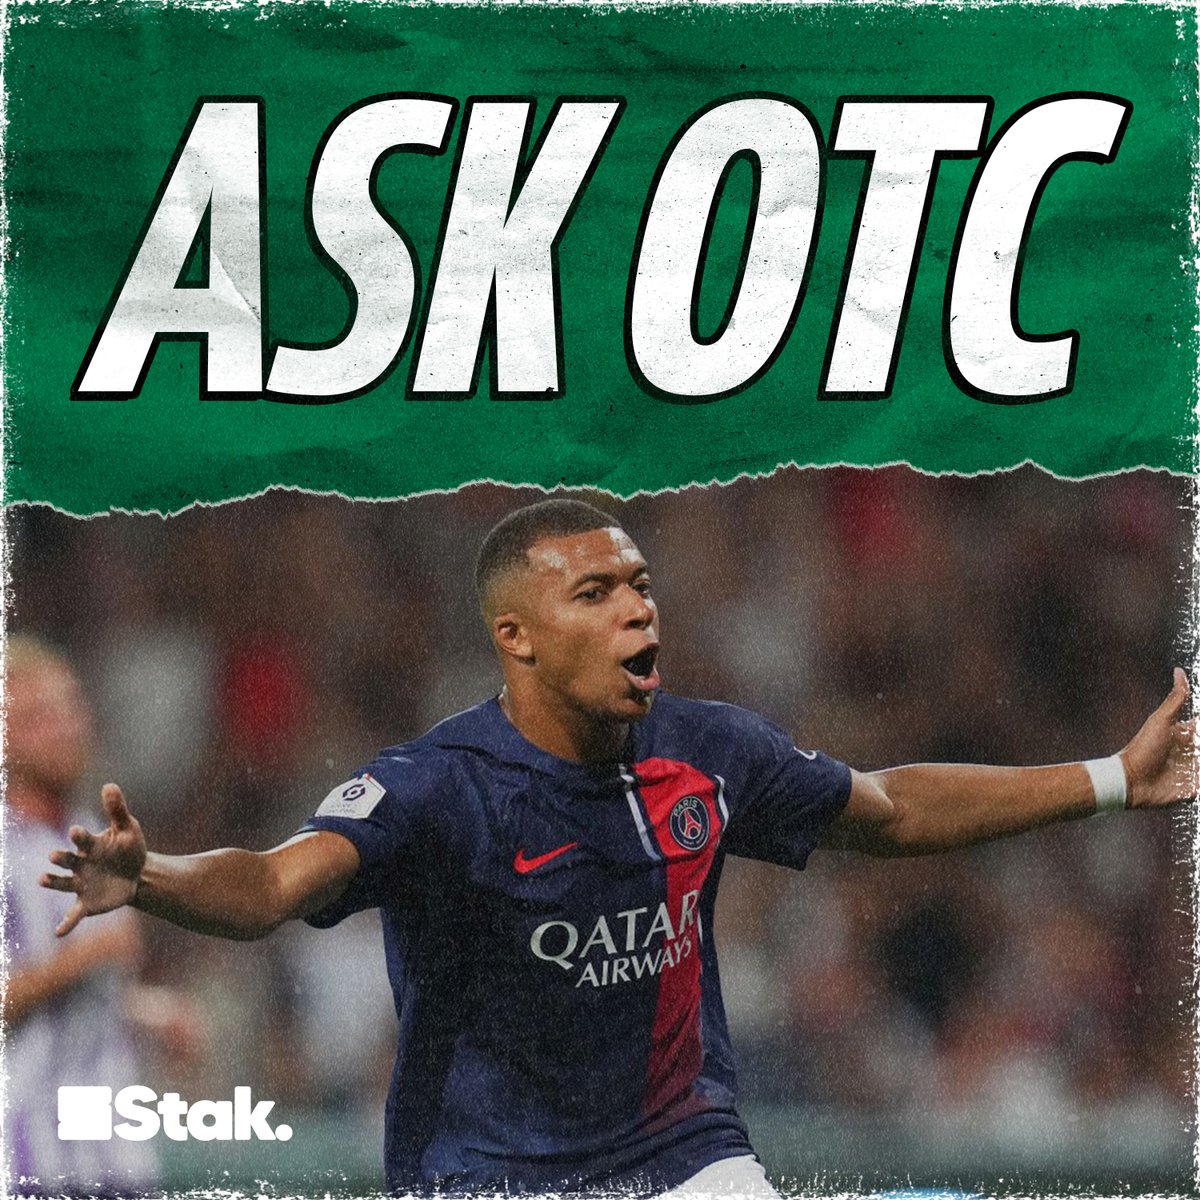 The season is now well and truly underway and there is already SO much to discuss! @dotunadebayo, @andybrassell and @NickyBandini will be answering YOUR questions on Ask OTC this Friday. Ask us your questions in the comments below 👇